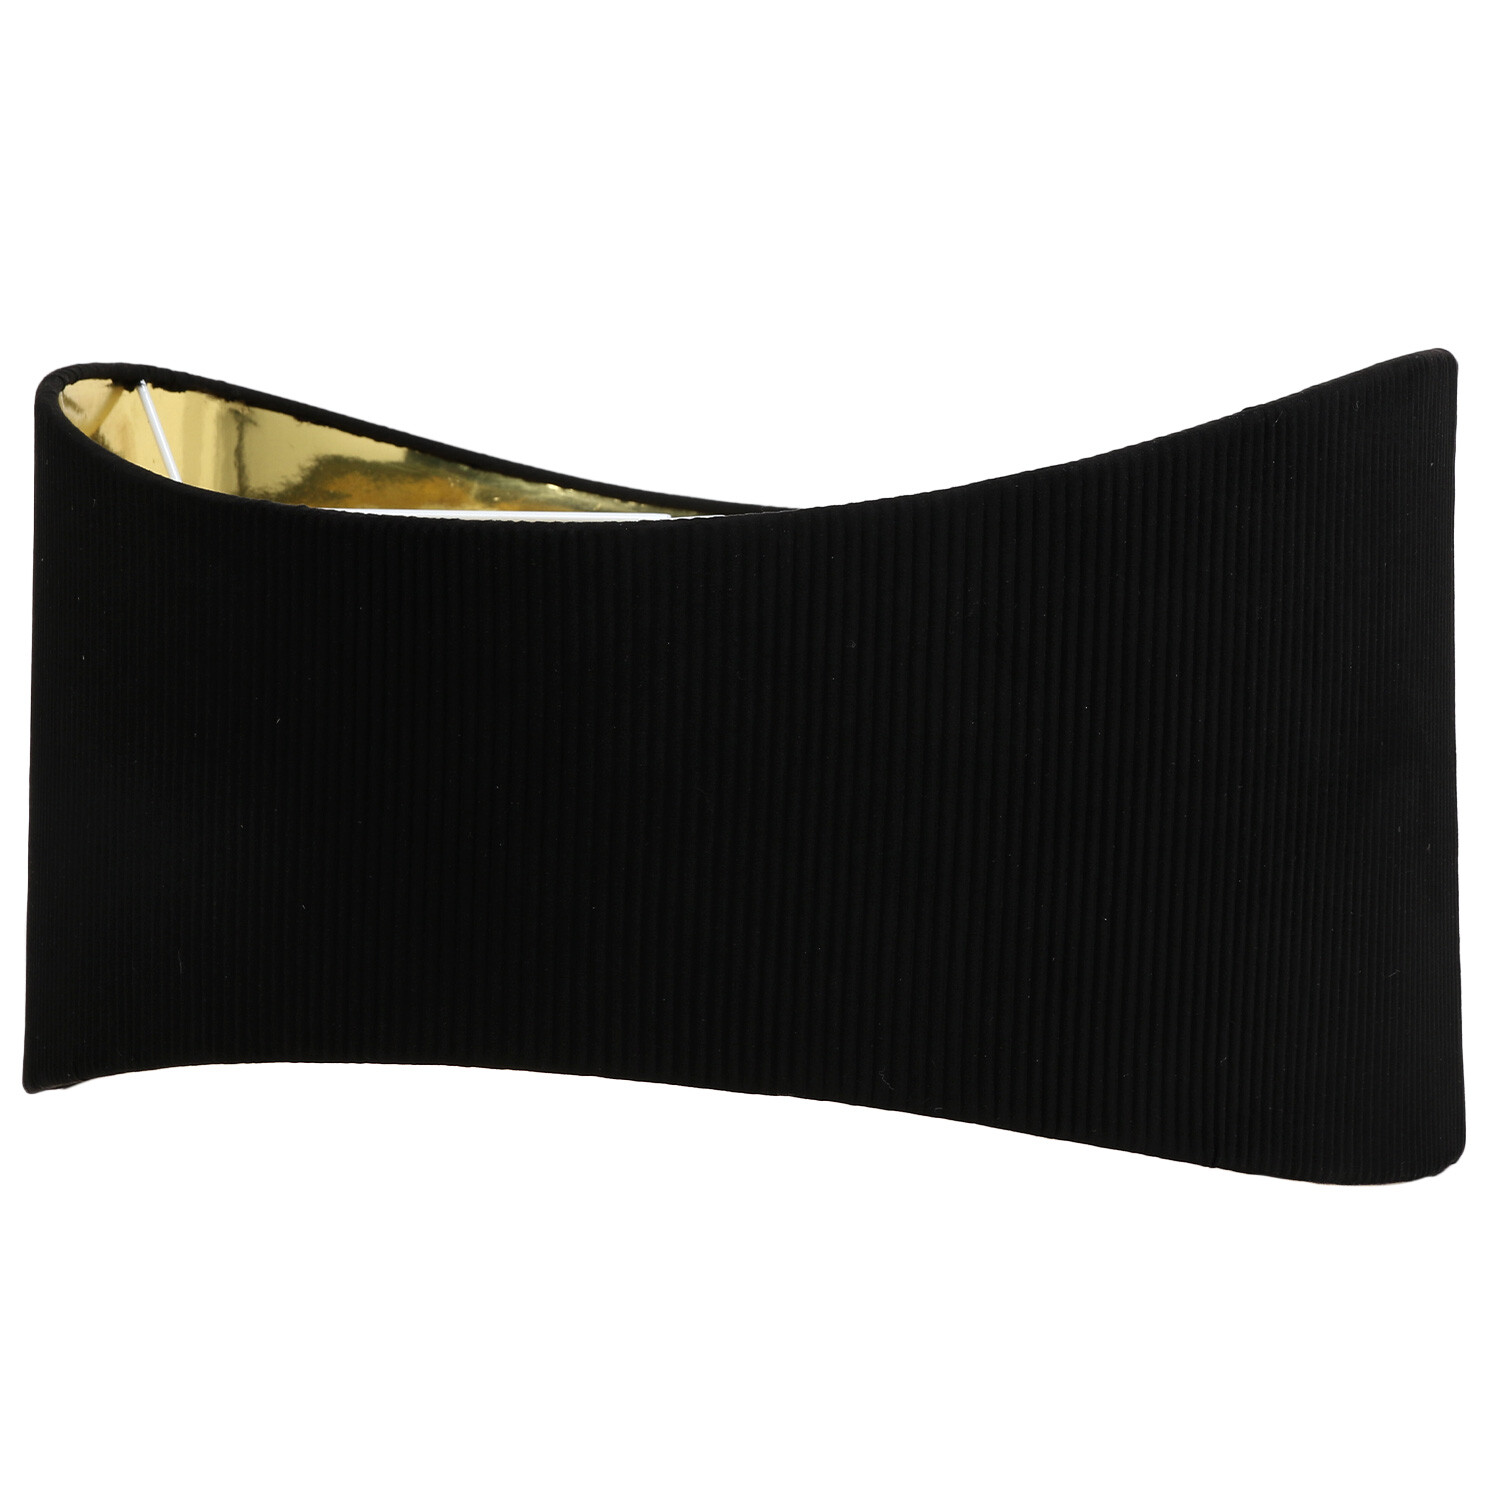 Black and Gold Metallic Lined Shade - Black Image 2